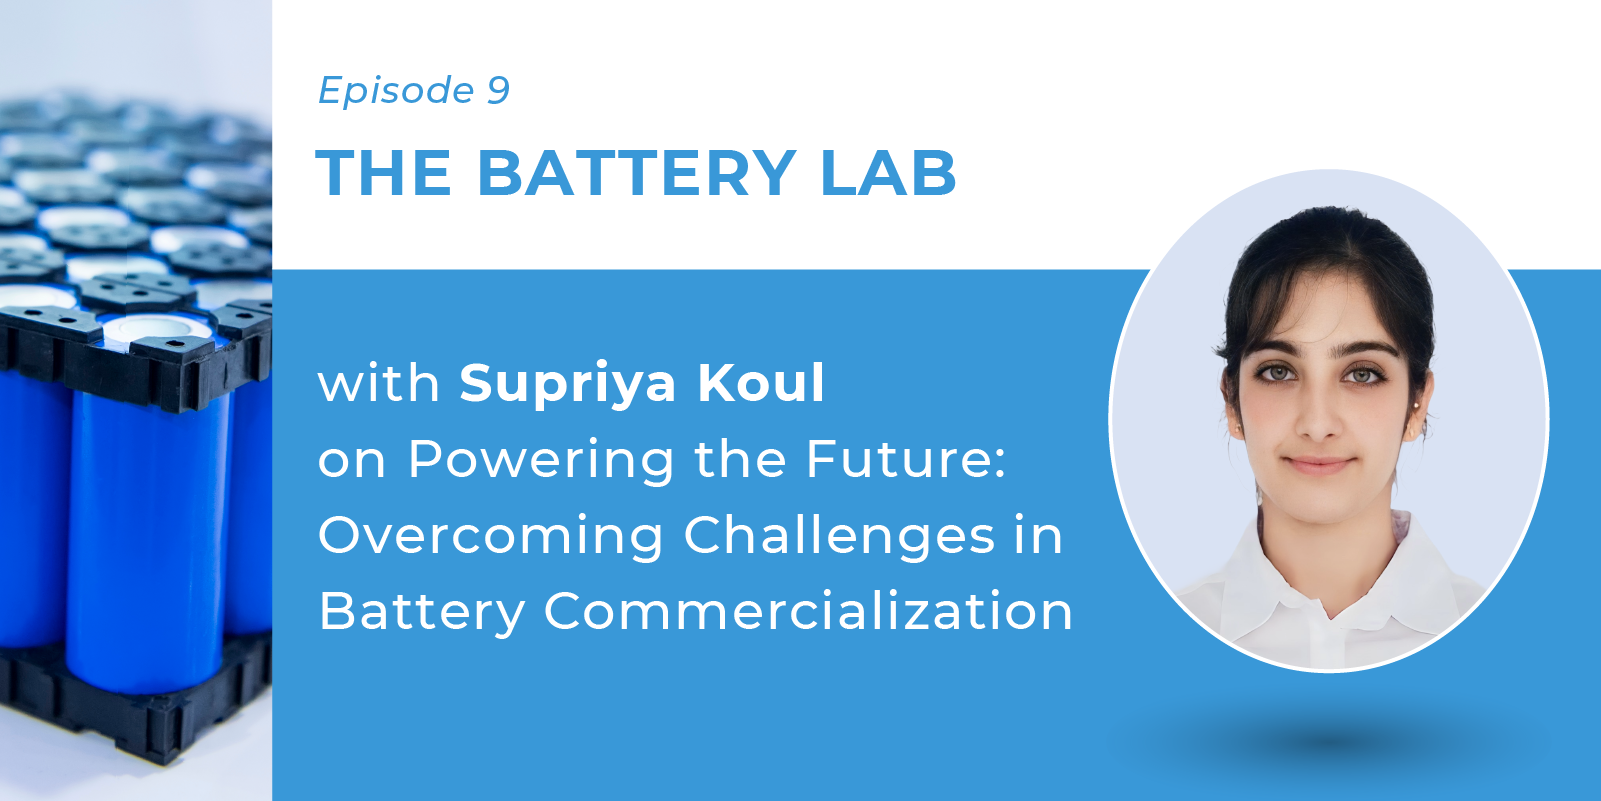 Powering the Future: Overcoming Challenges in Battery Commercialization